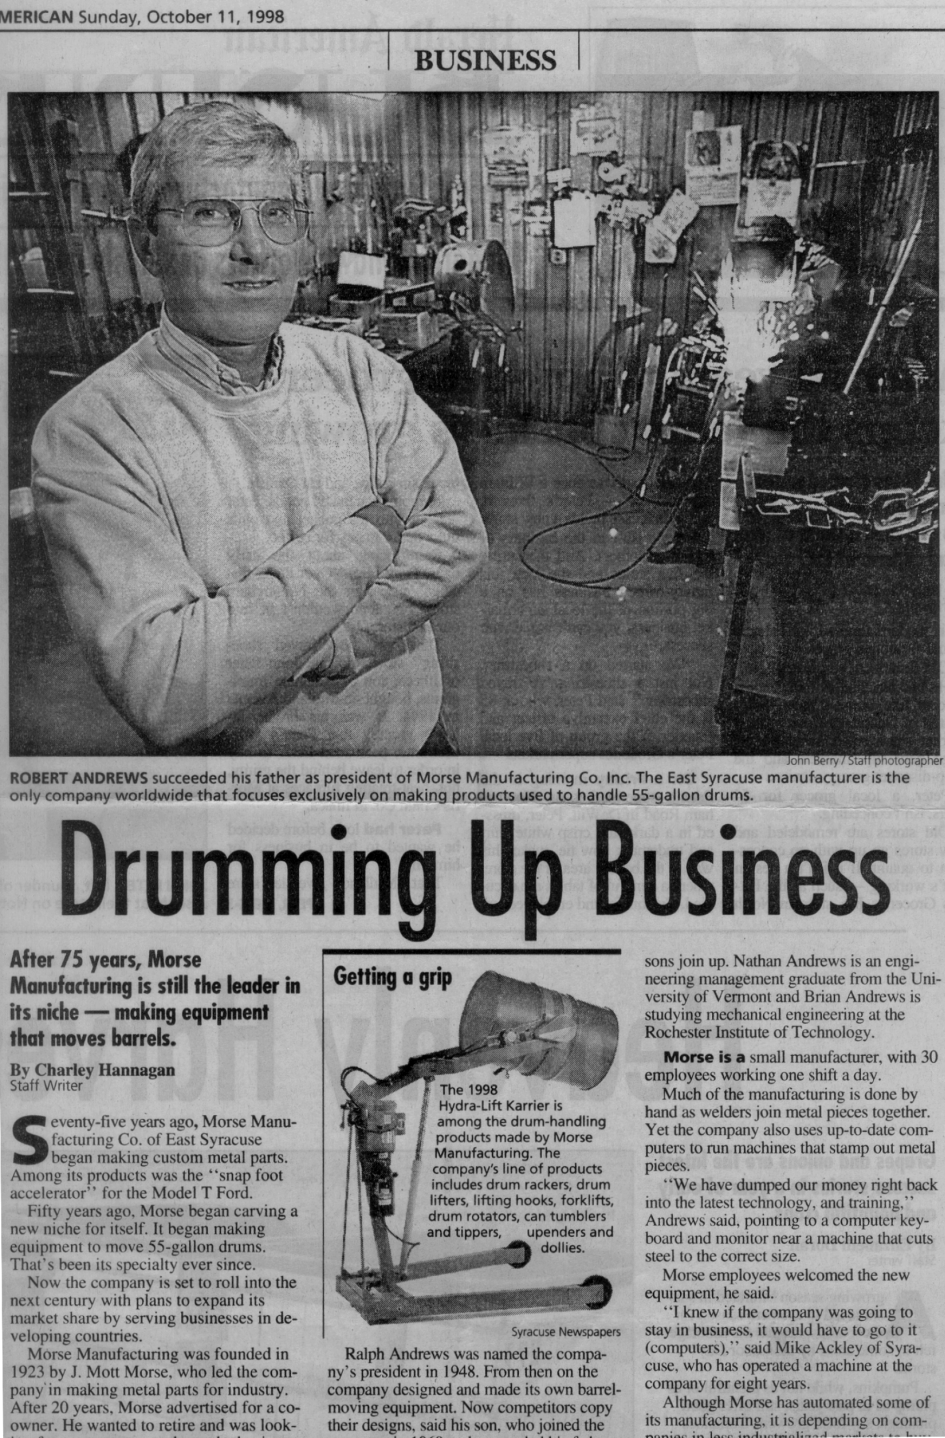 Morse News Article - Drumming Up Business